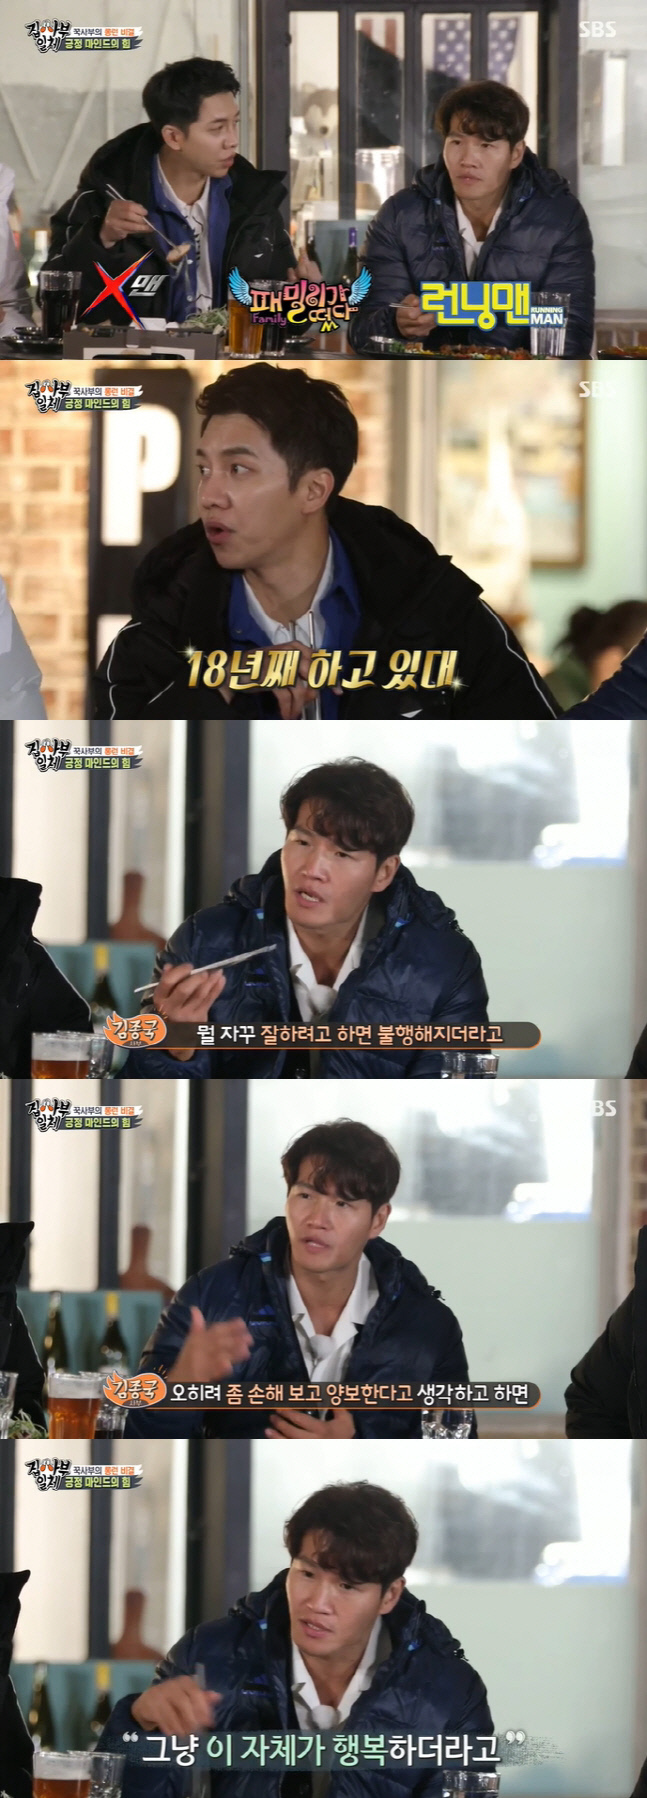 Kim Jong-kook stepped out as master at SBS All The Butlers broadcast on the 18th.Kim Jong-kook, who became an entertainment master, won the 2020 SBS Entertainment Grand Prize last year.Kim Jong-kook, who won two categories, including the Grand Prize and the Entertainment Grand Prize, along with Lee Hyo-ri, told the All The Butlers members that One-Punch Man and Vol, who survived as entertainers for a long time.2 was released.Kim Jong-kook has been keeping SBS Sunday entertainment for 18 years through X Man, Family Out and Running Man.He said, If you try to do something well, you make people unhappy.Rather, if you lose a little more and give up and live, you are just happy. Kim Jong-kook said, I think its important to change the small part of the negative thing in there somehow, but it helps me a lot.For example, having a positive mind that you can do more lower body exercise even if your hand is injured during health.Kim Jong-kooks entertainment know-how was also seen in the thigh Wrestle.Kim Dong-Hyun and thigh Wrestle were located at the bottom of the hill, but Kim Jong-kook said, Do you have a brush?Kim Jong-kooks confidence was due to his know-how of Hump Wrestle accumulated through his long experience.He took a 30-second limit and took a chance to catch the opportunity and then surprise the opponent when he was off guard.Kim Dong-Hyun was helplessly hit by Kim Jong-kooks time difference strategy.Photos  SBS